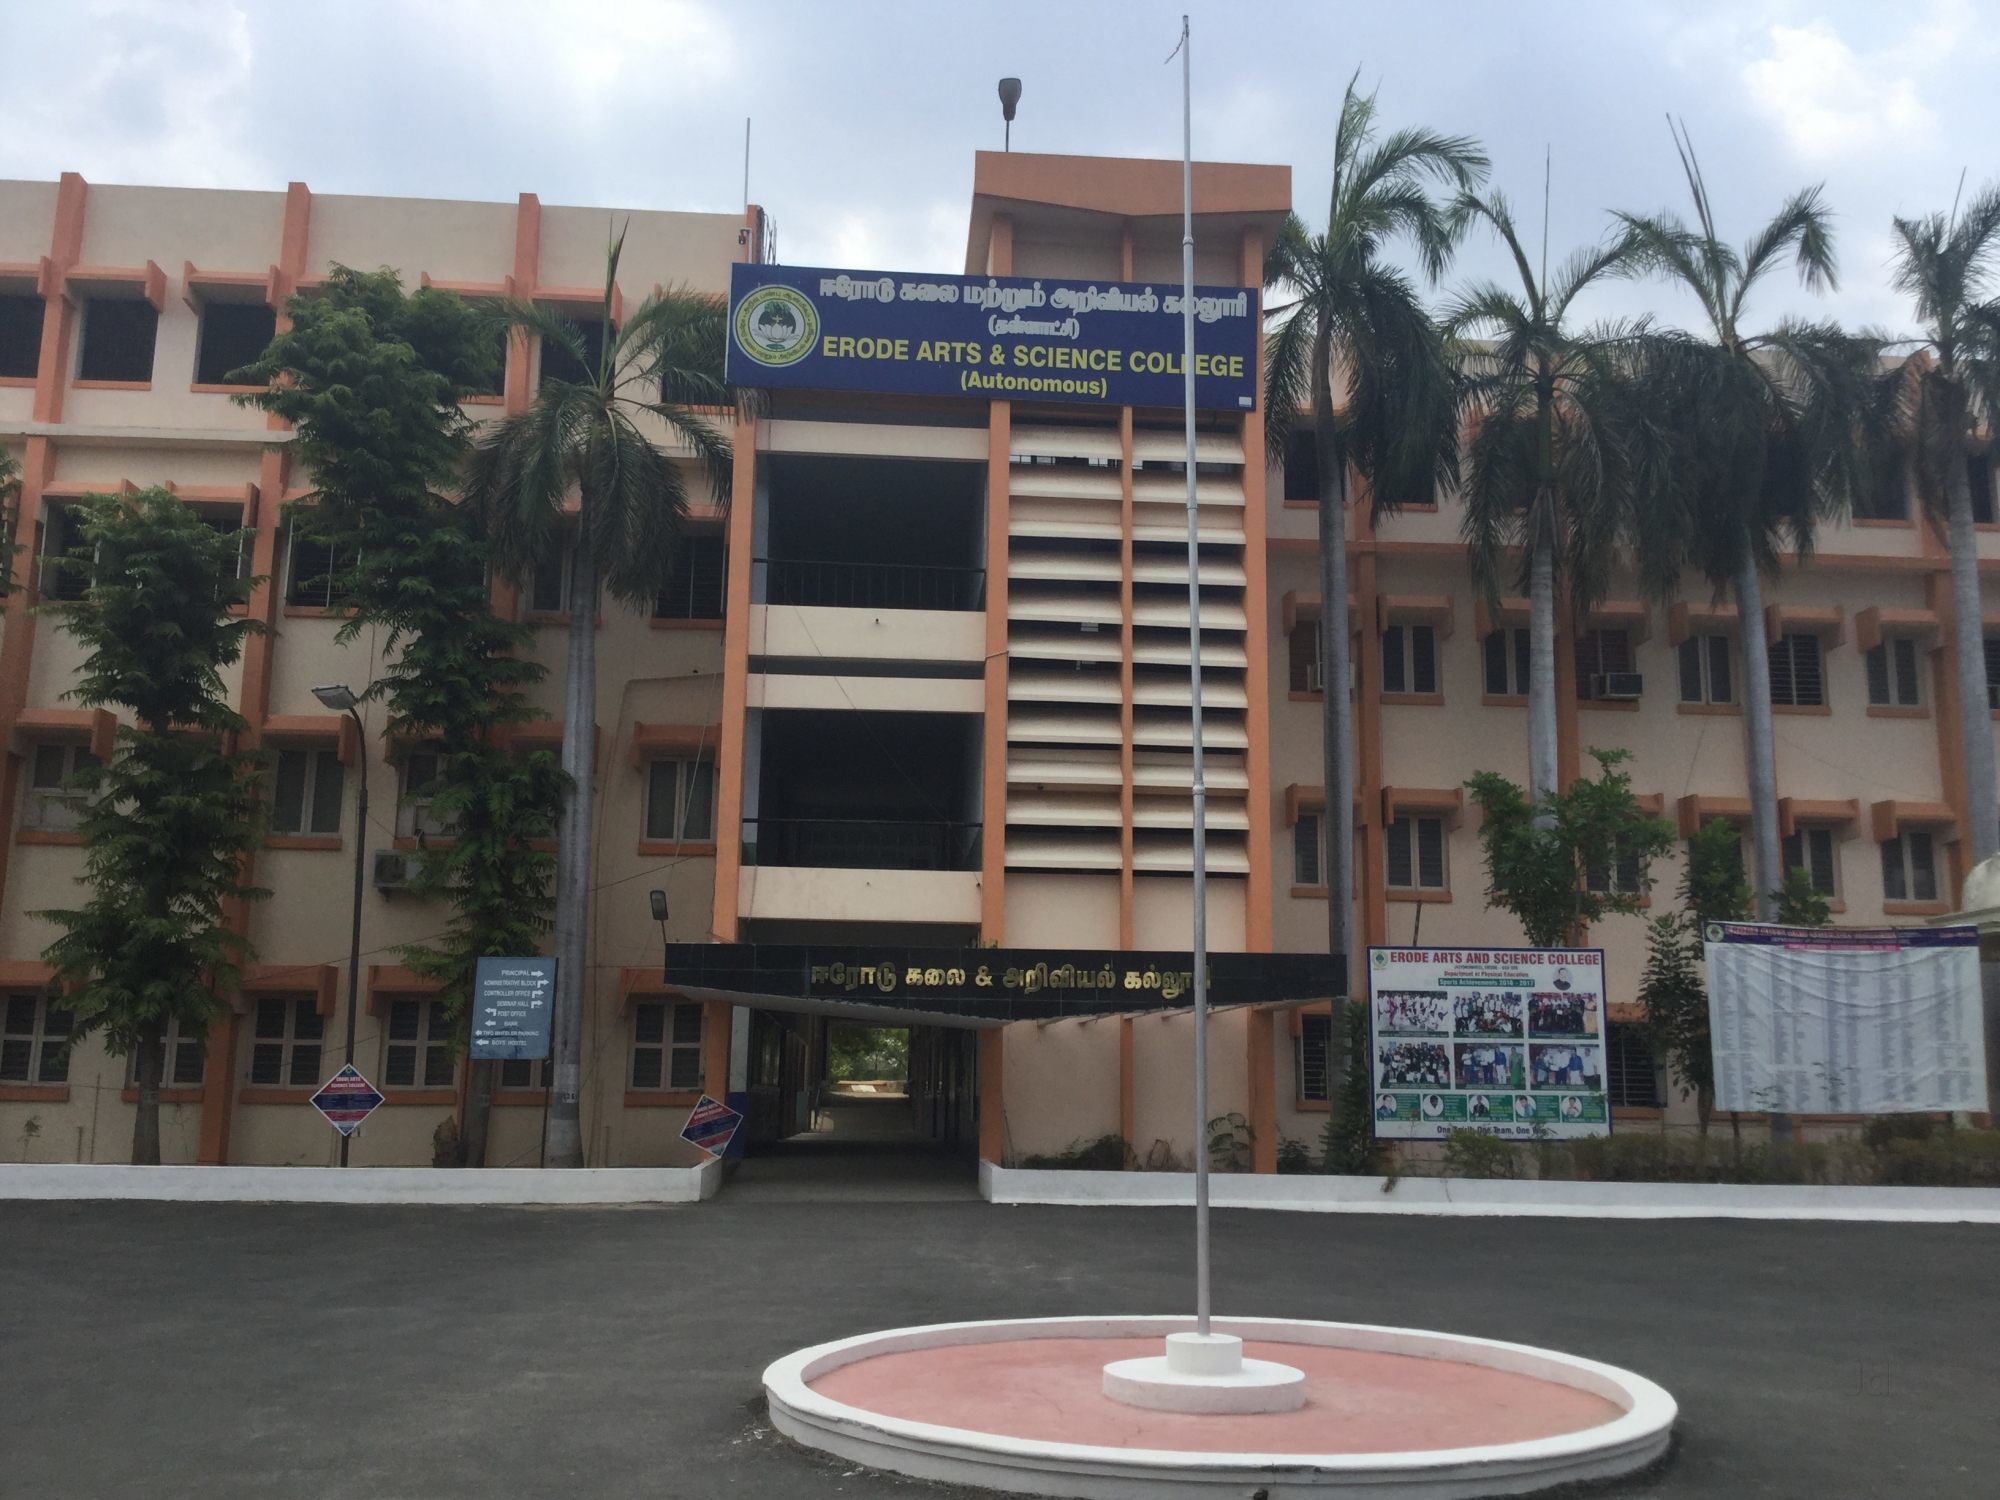 Erode arts college and science college, erode